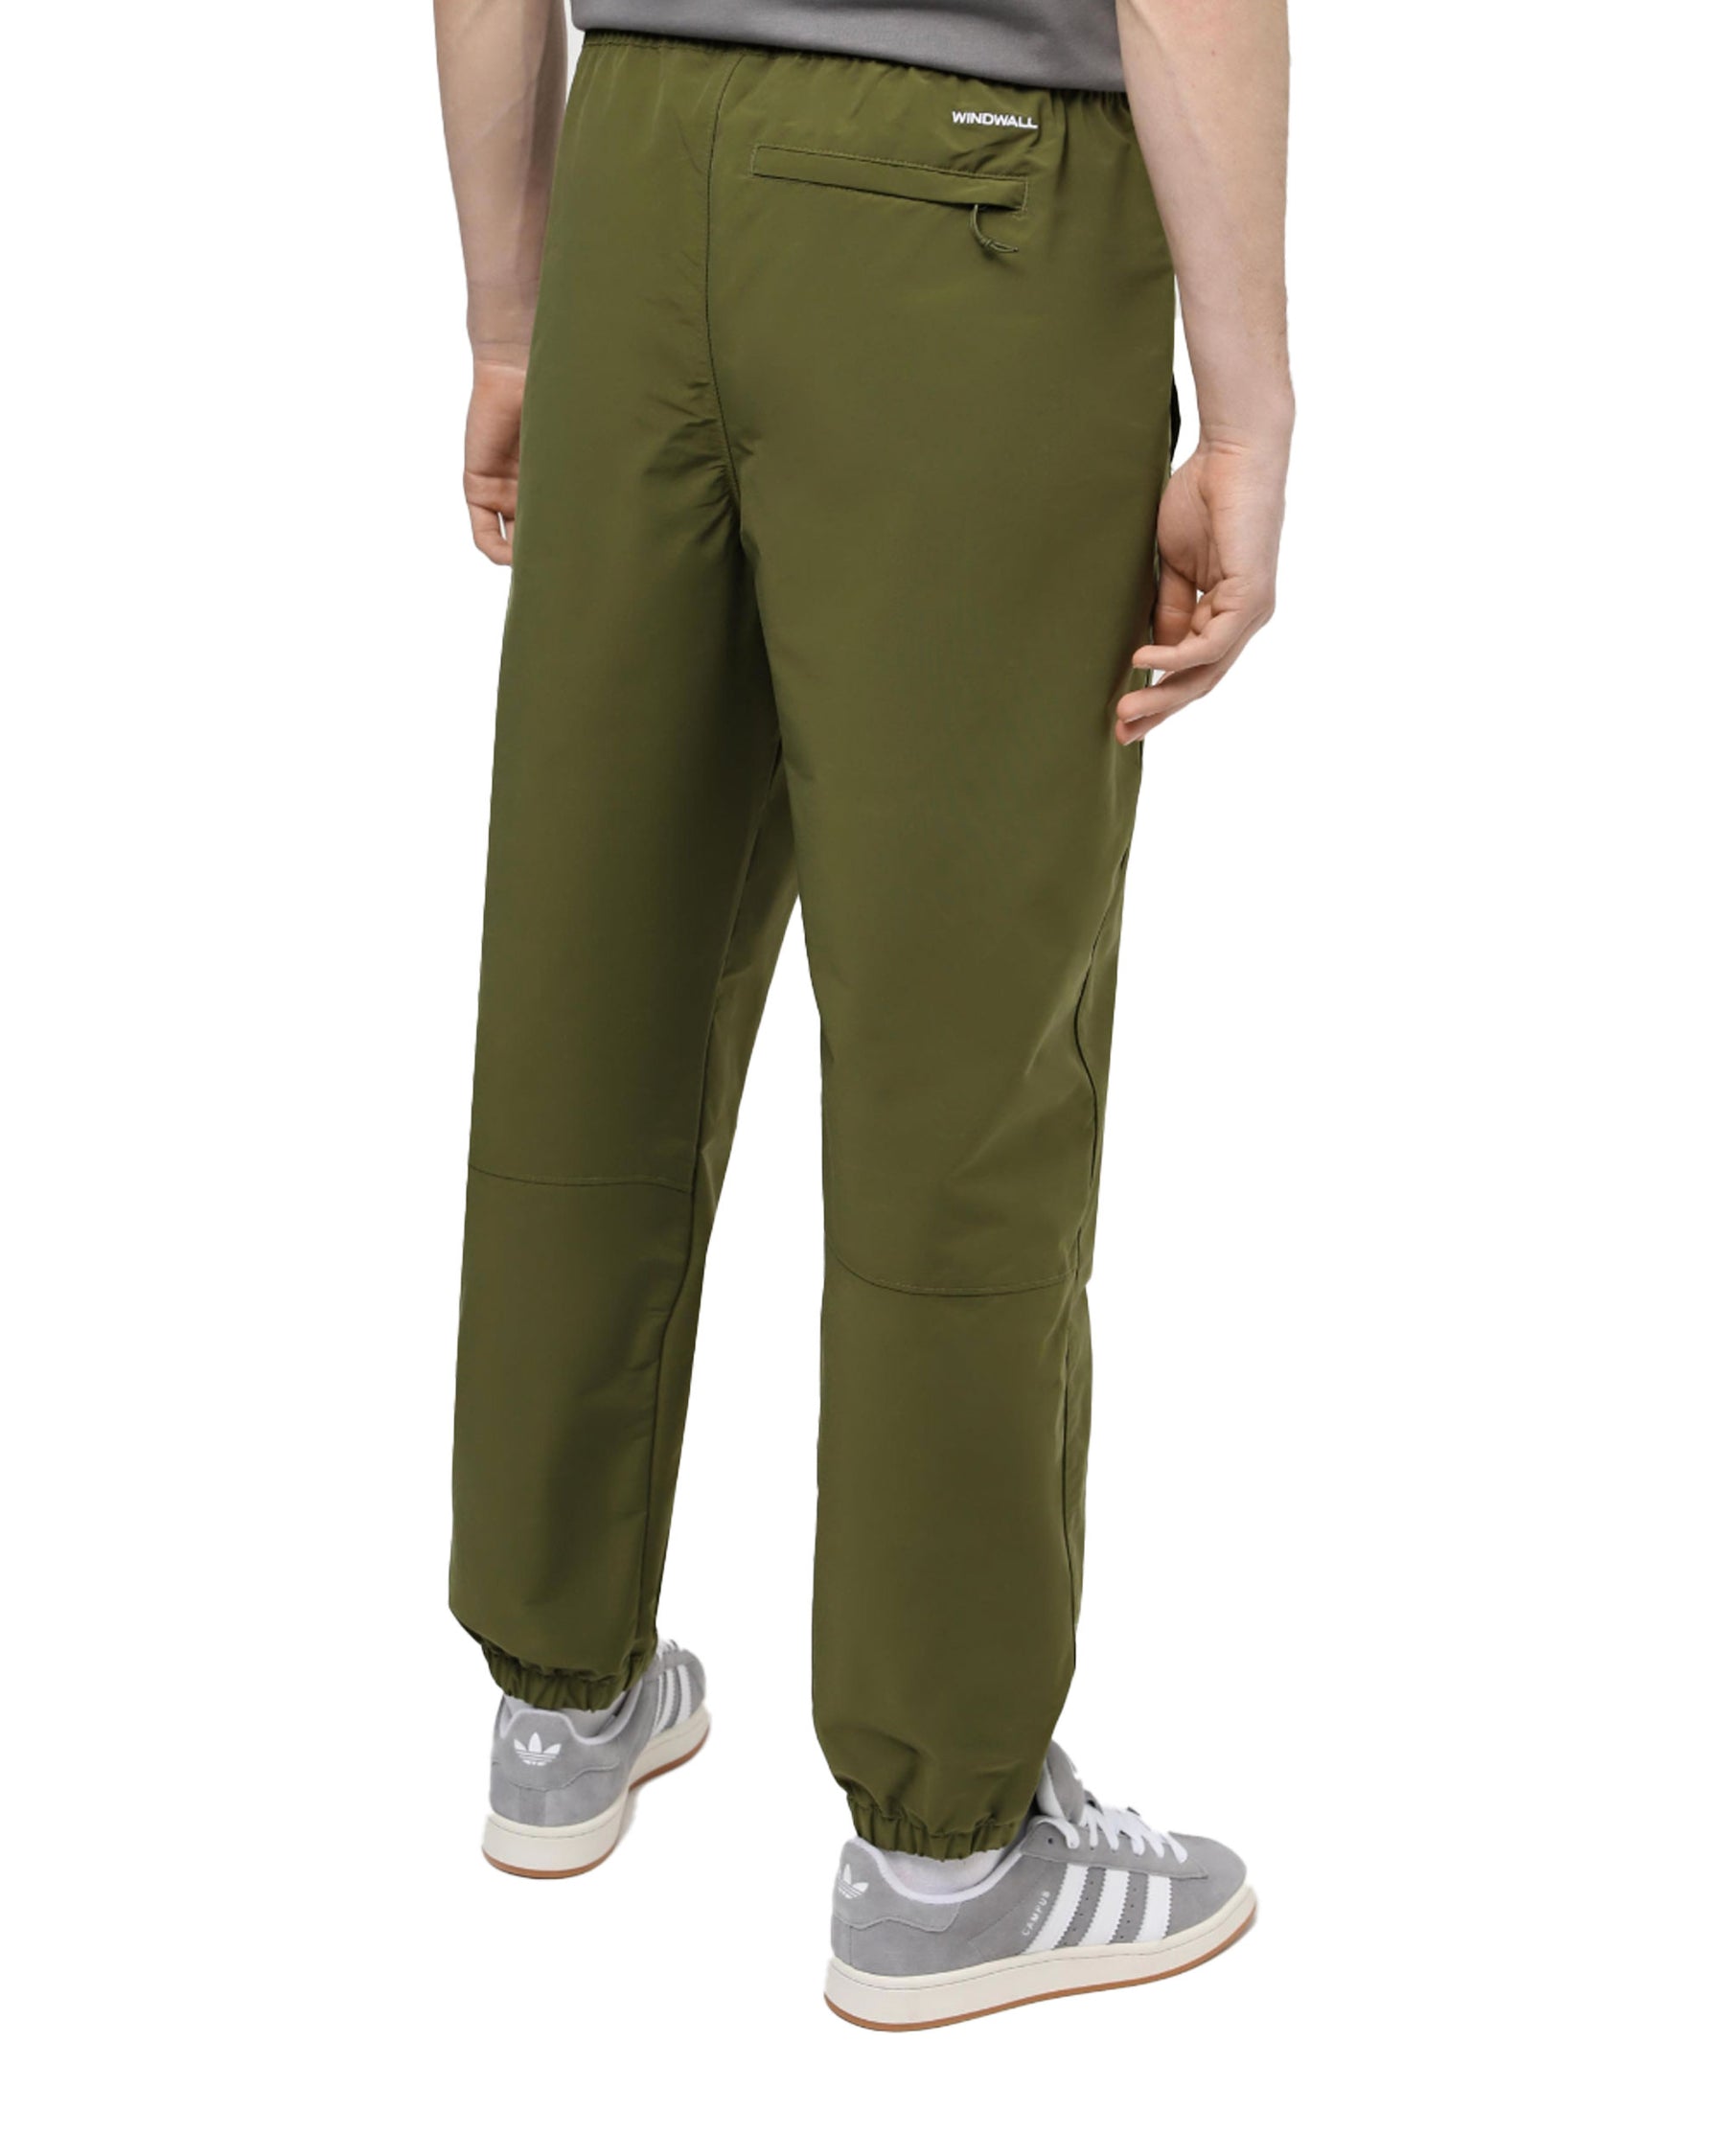 Pantalone Uomo The North Face Easy Wind Pant Forest Olive